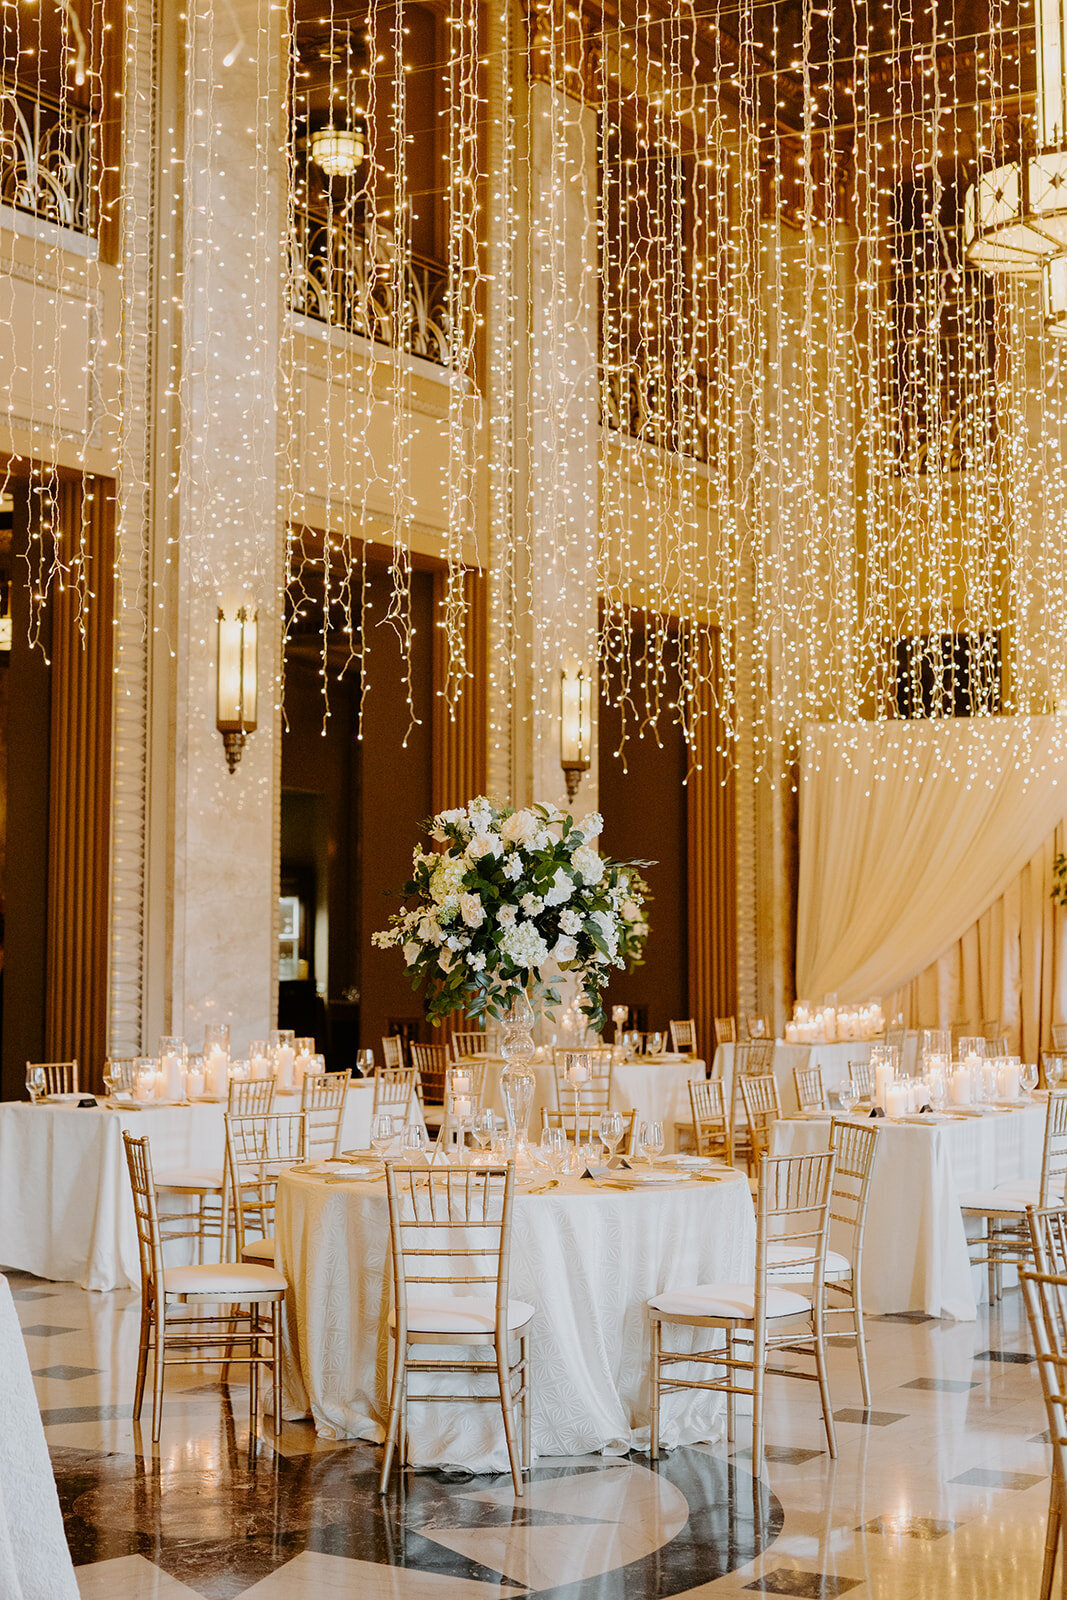 Wedding reception details with florals, gold chairs, and dangling twinkly lights